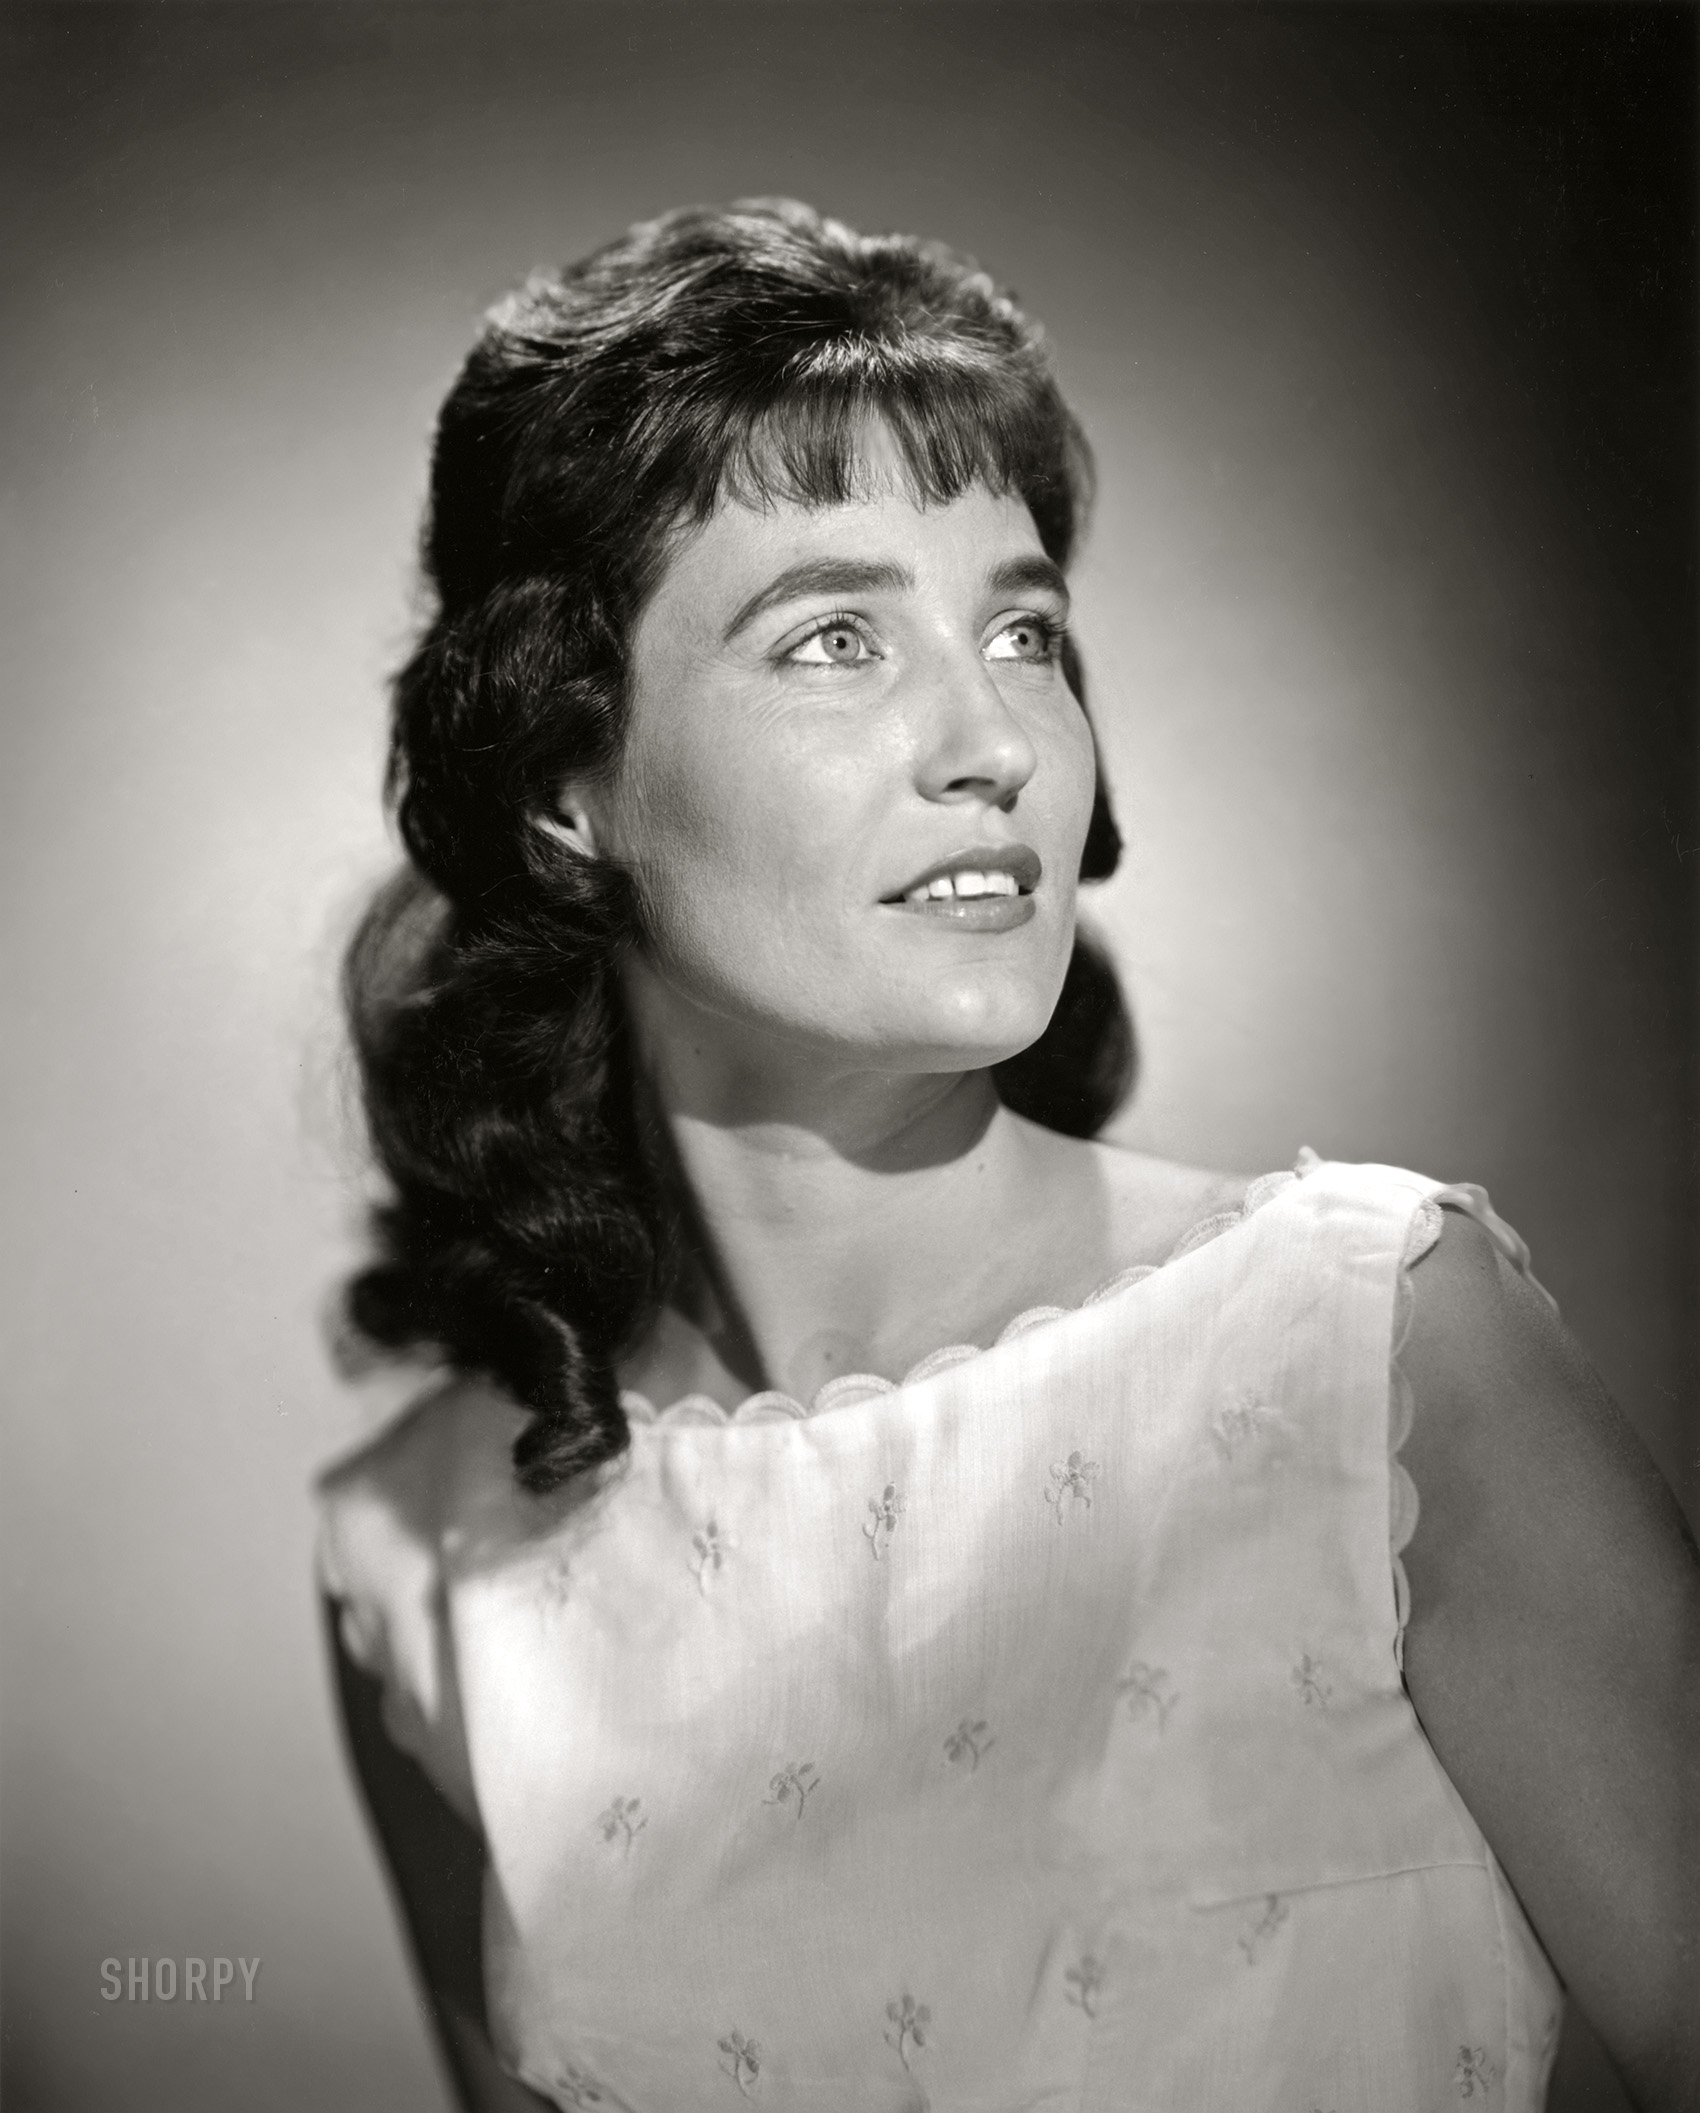 Nashville, 1962. Portrait by Walden S. Fabry. Annenberg Space for Photography. View full size.

Loretta Lynn, Country Music's
'Coal Miner's Daughter,' Is Dead at 90
&nbsp; &nbsp; &nbsp; &nbsp; NASHVILLE, Oct. 4 -- Loretta Lynn, the singer who rose from a hardscrabble upbringing to become the most significant female artist in country music history, died today at her home in Hurricane Mills. She was 90. -- Nashville Tennessean